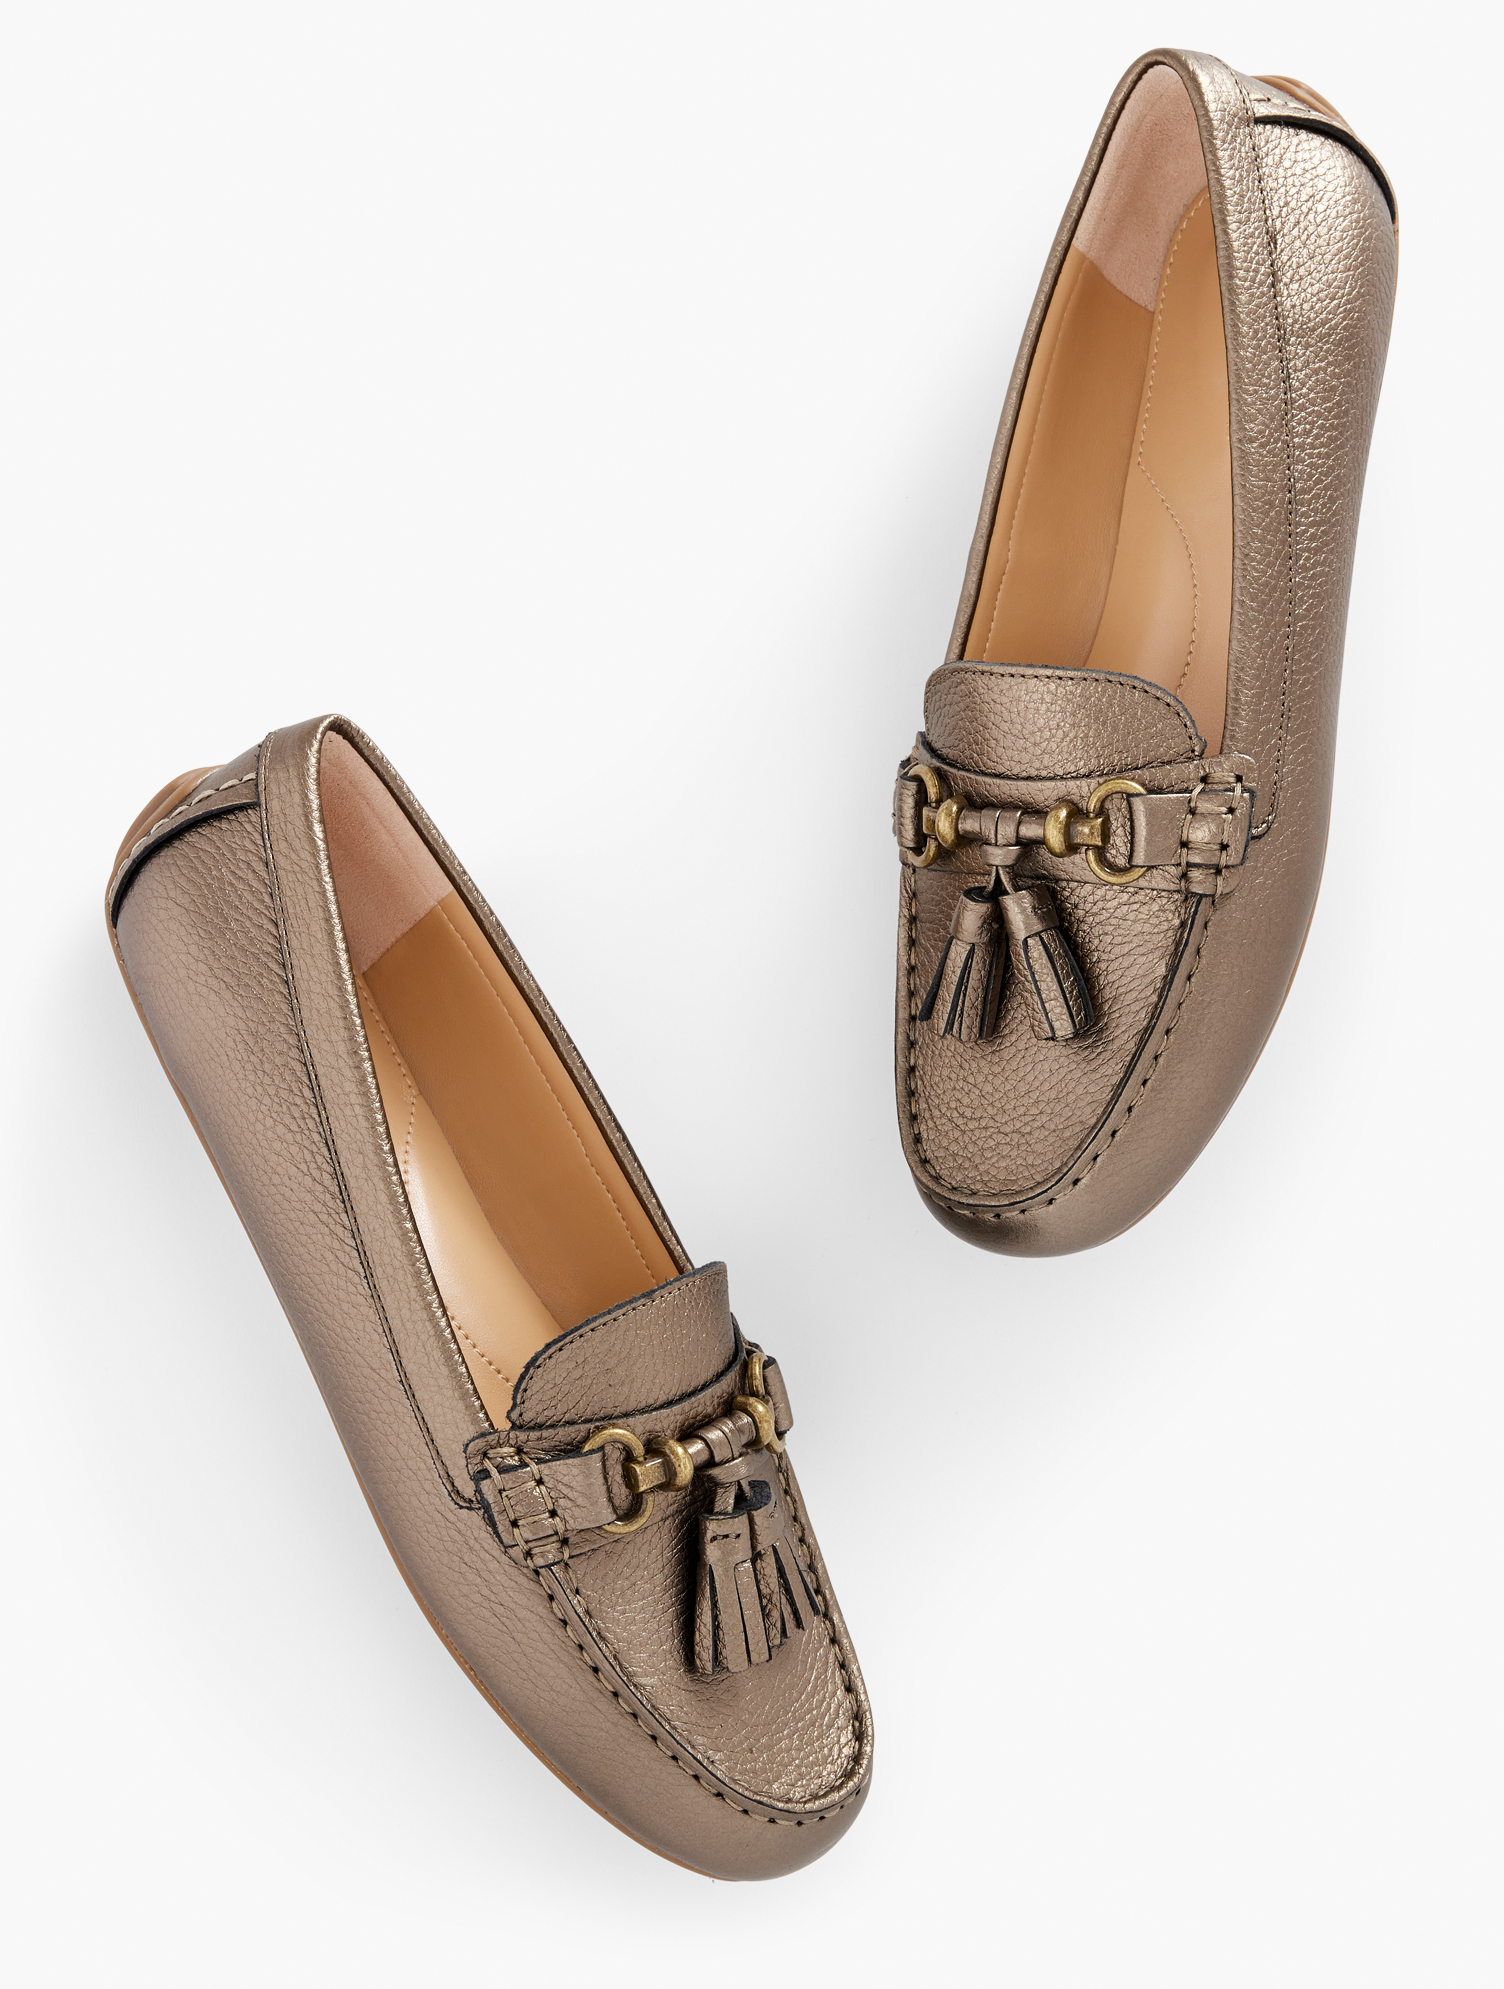 Talbots Everson Tassel Driving Moccasins Shoes - Leather - Bronze - 11m